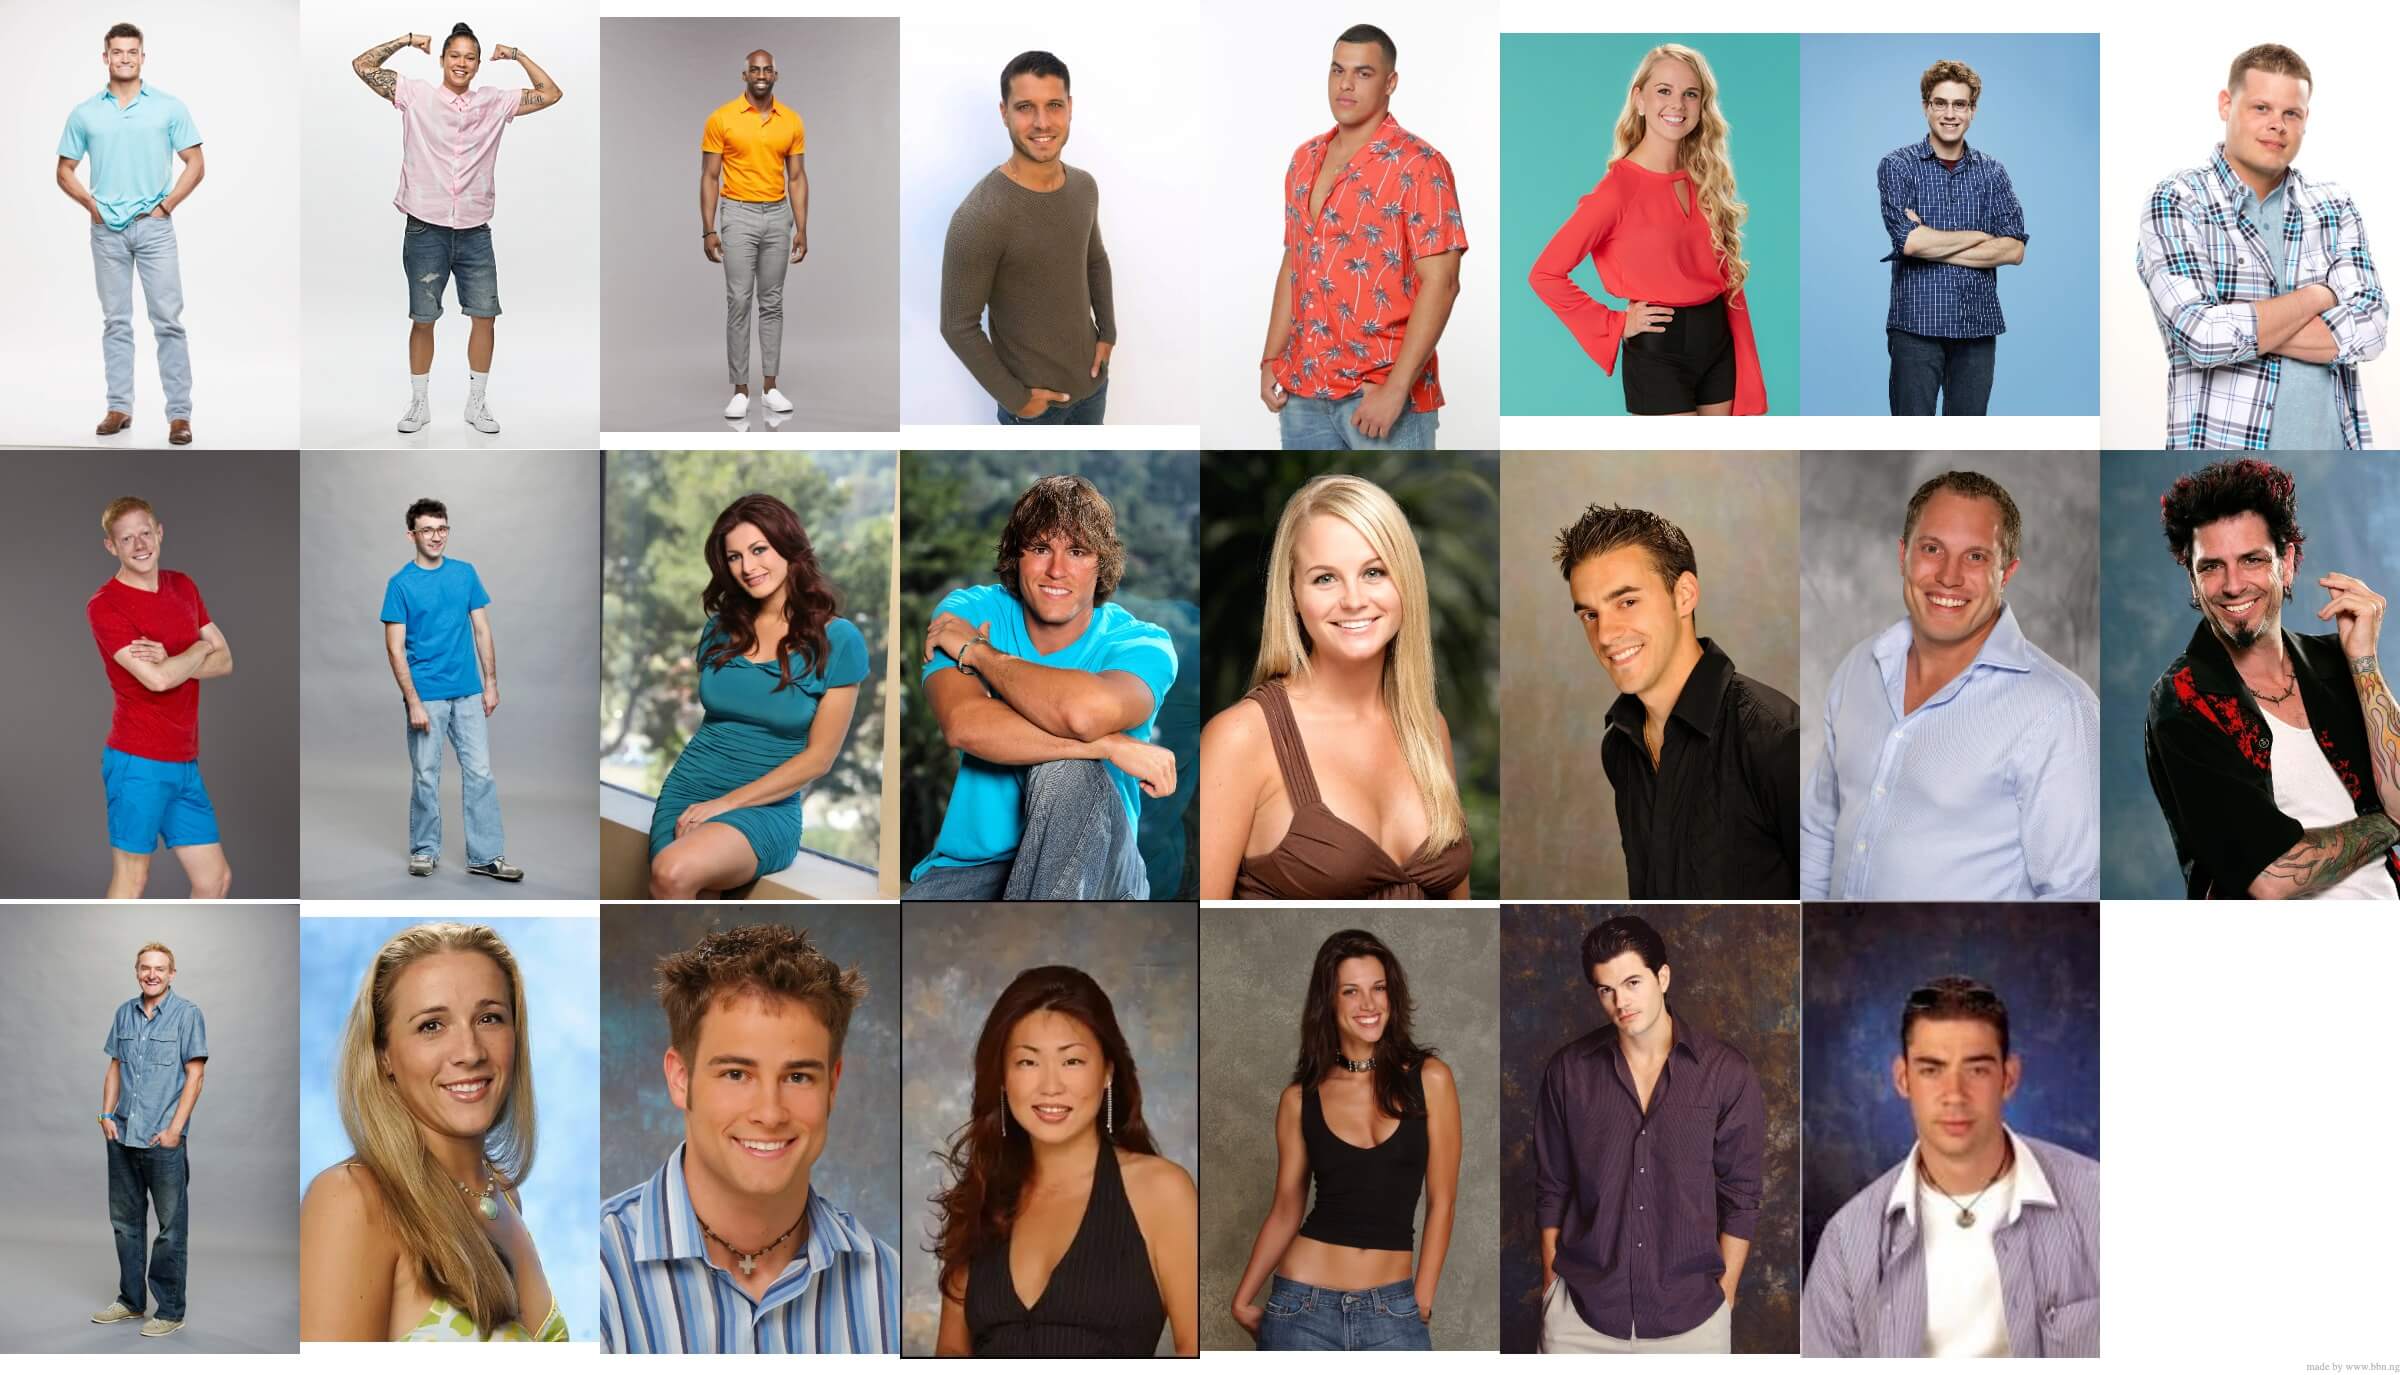 Who’s Your Favourite Big Brother Winner?